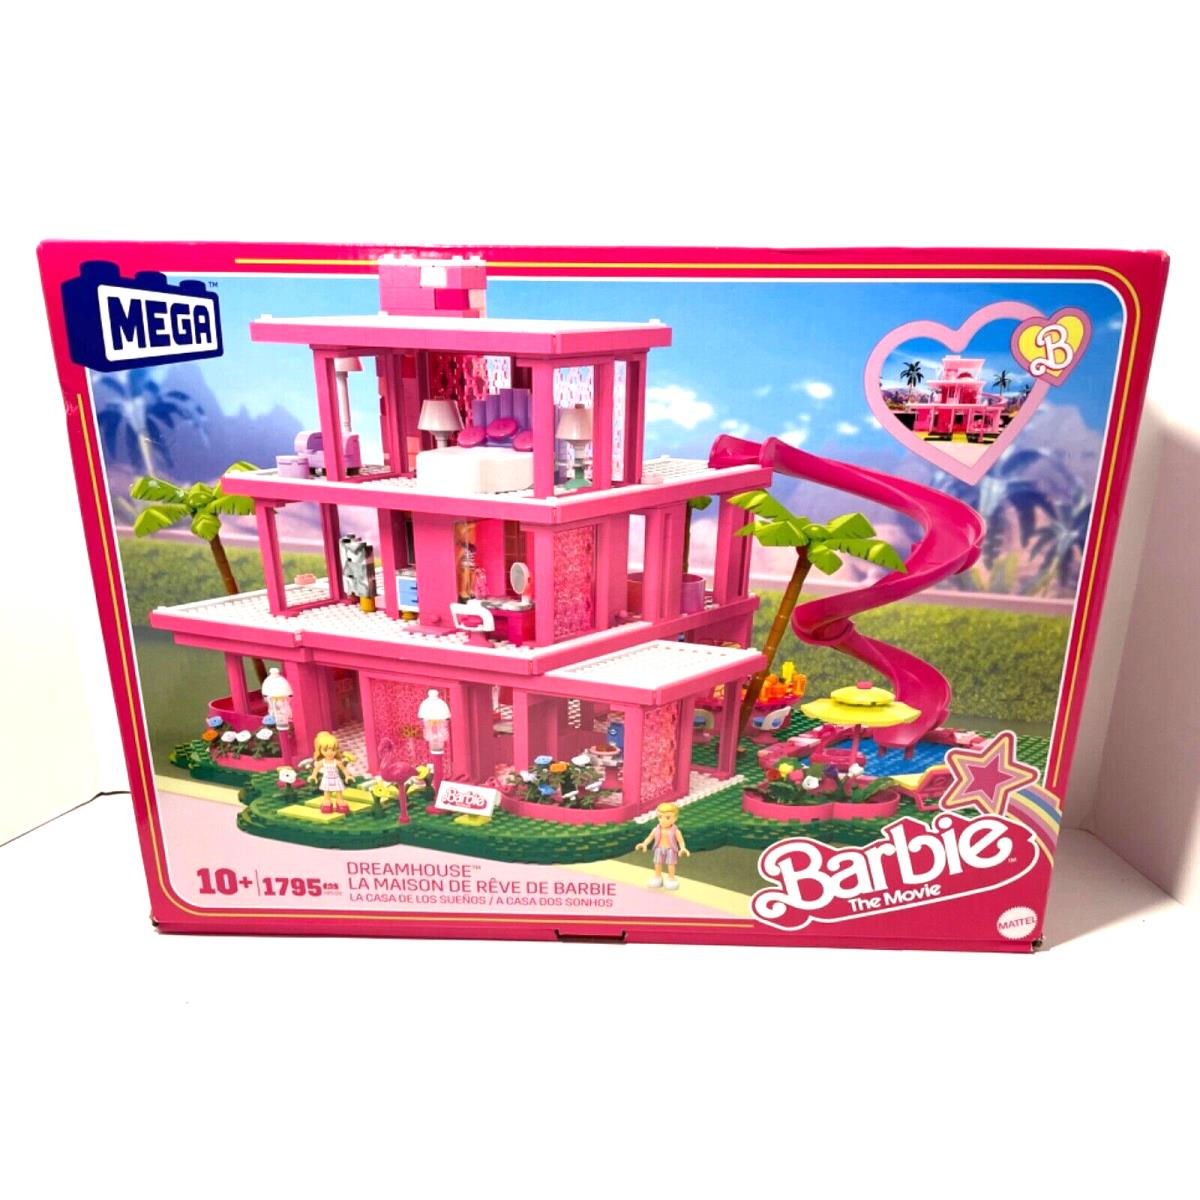 Mega Barbie The Movie Building Toys For Adults Dreamhouse with 1795 Pcs